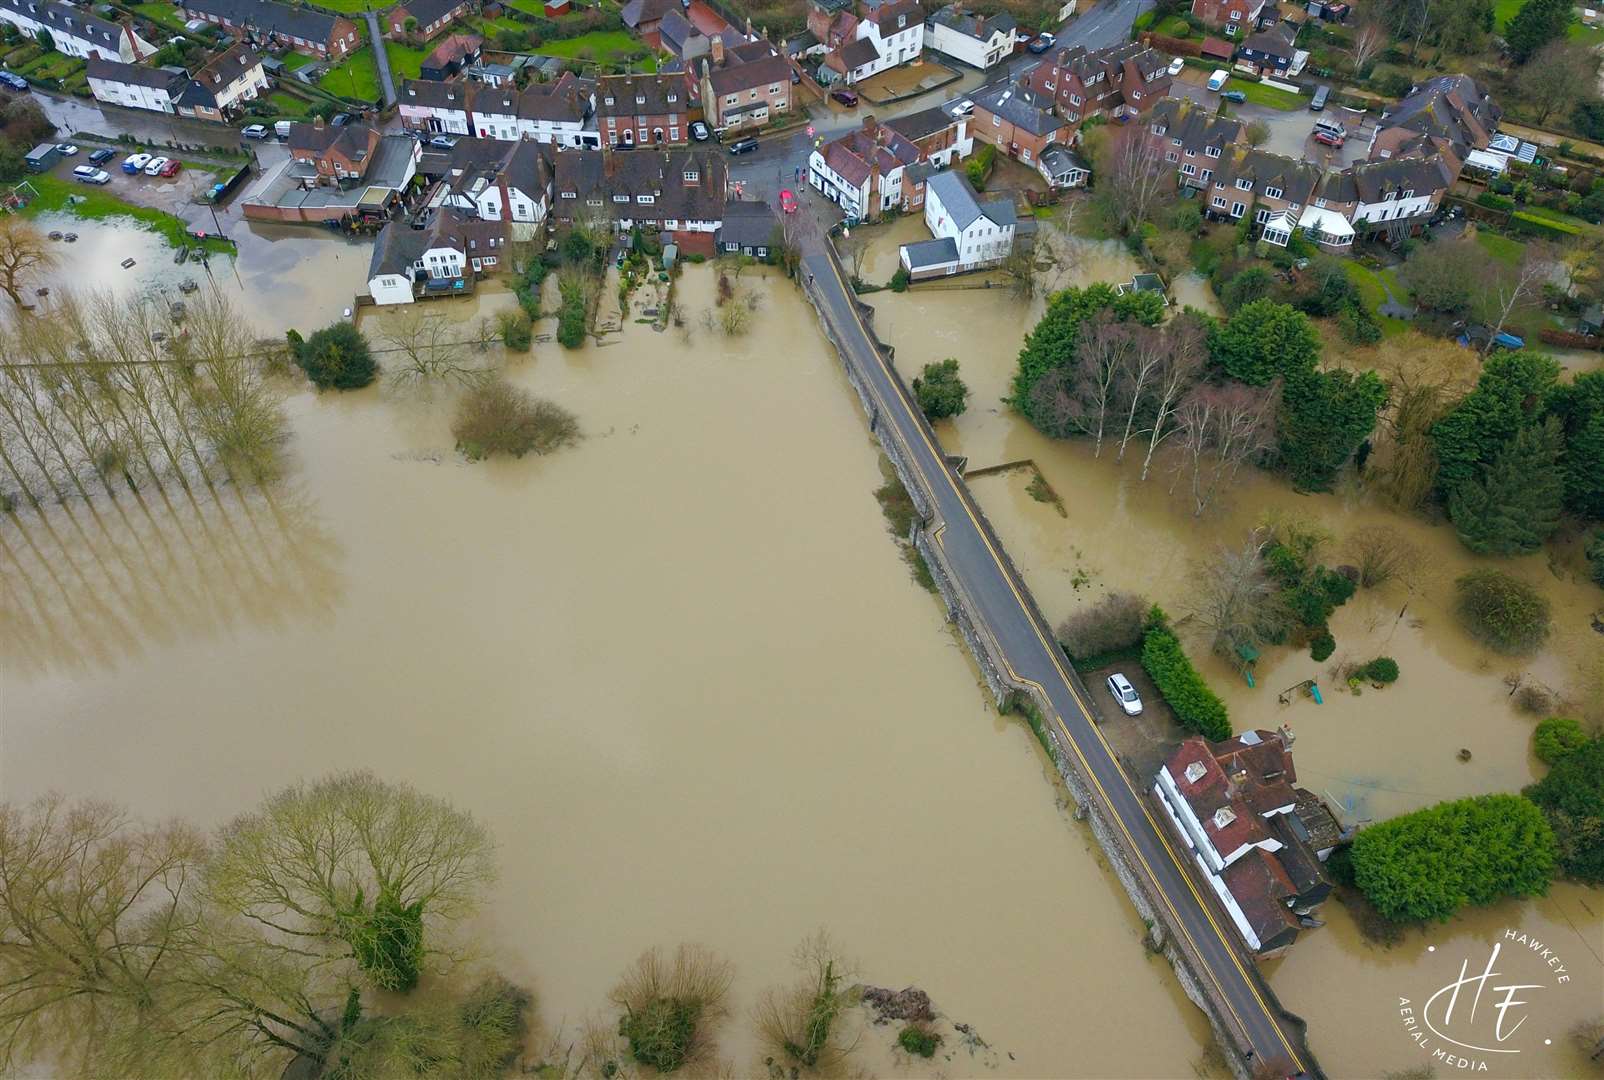 Aerial images show the extent of flooding in Yalding. Pic: Hawkeye Aerial Media (Twitter: @Hawkeye3185)